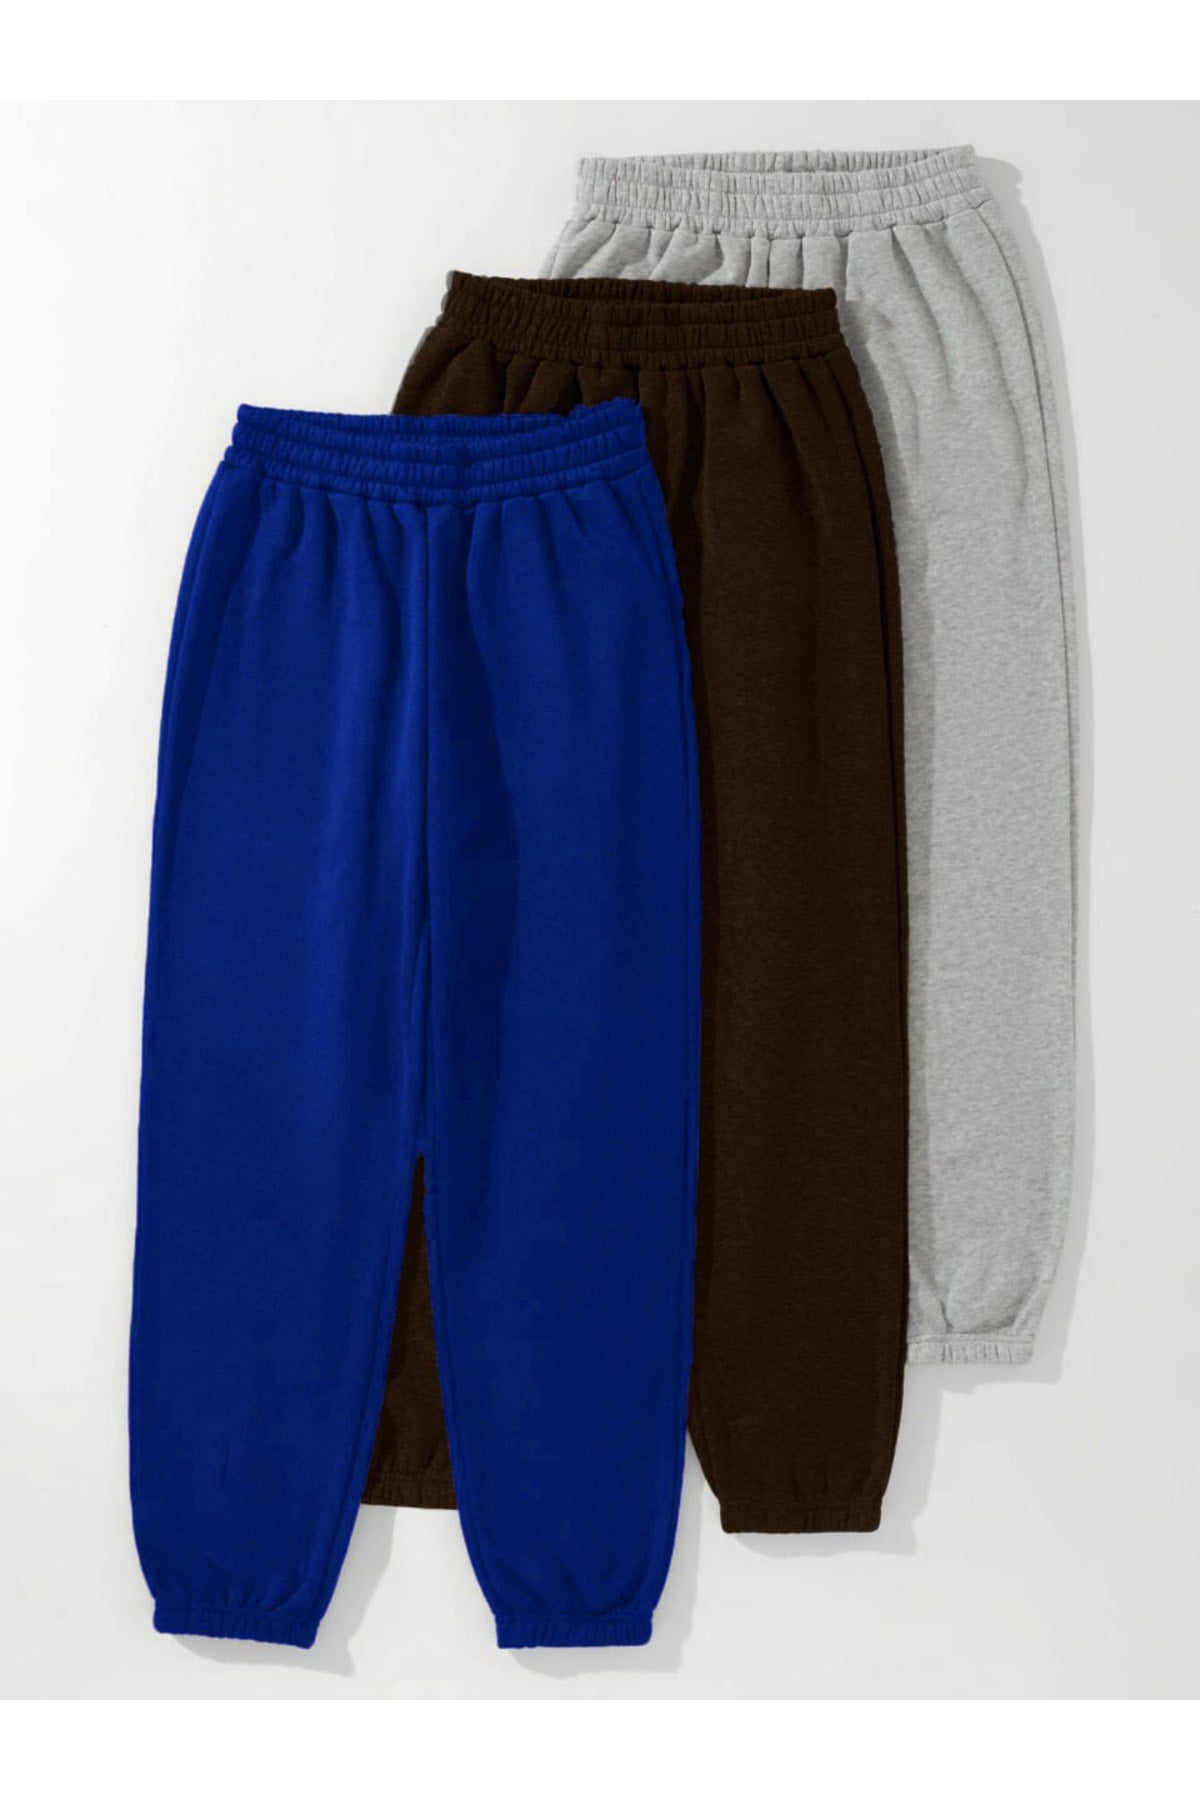 Basic 3-pack Jogger Sweatpants - Sax Blue, Gray And Brown, Elastic Legs, Summer